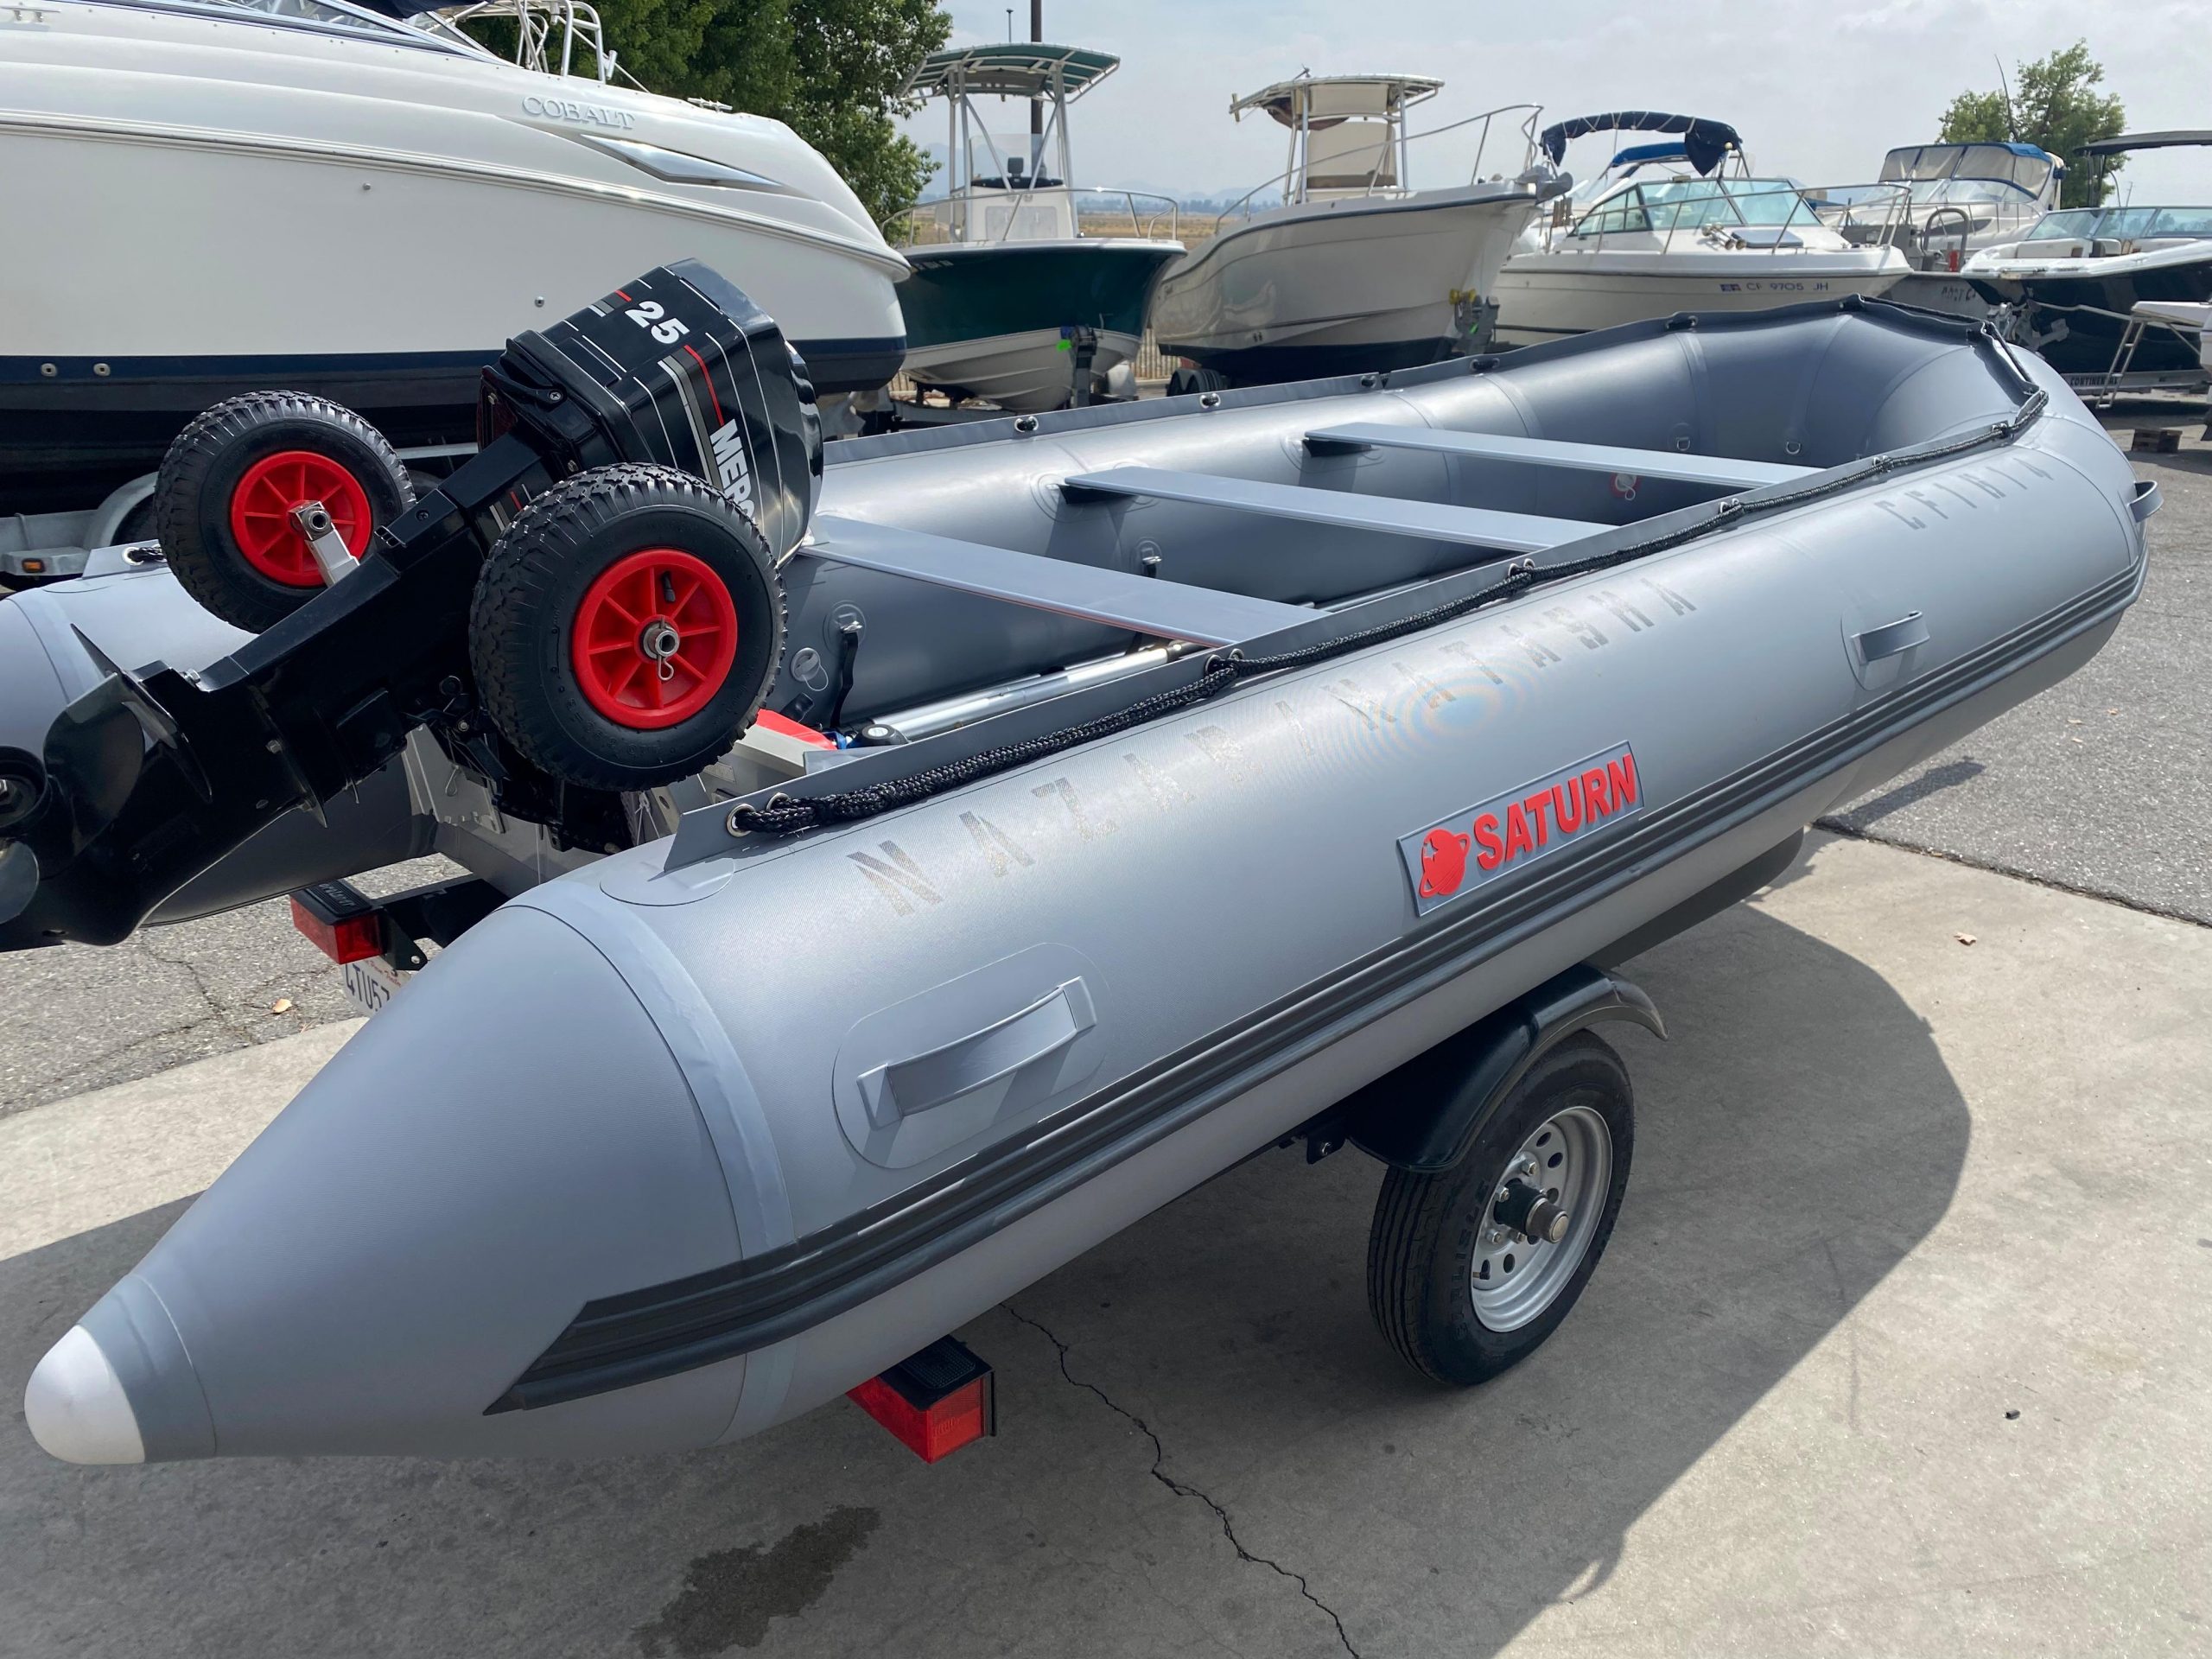 Best Inflatable Fishing Boats In 2022 - boats.com